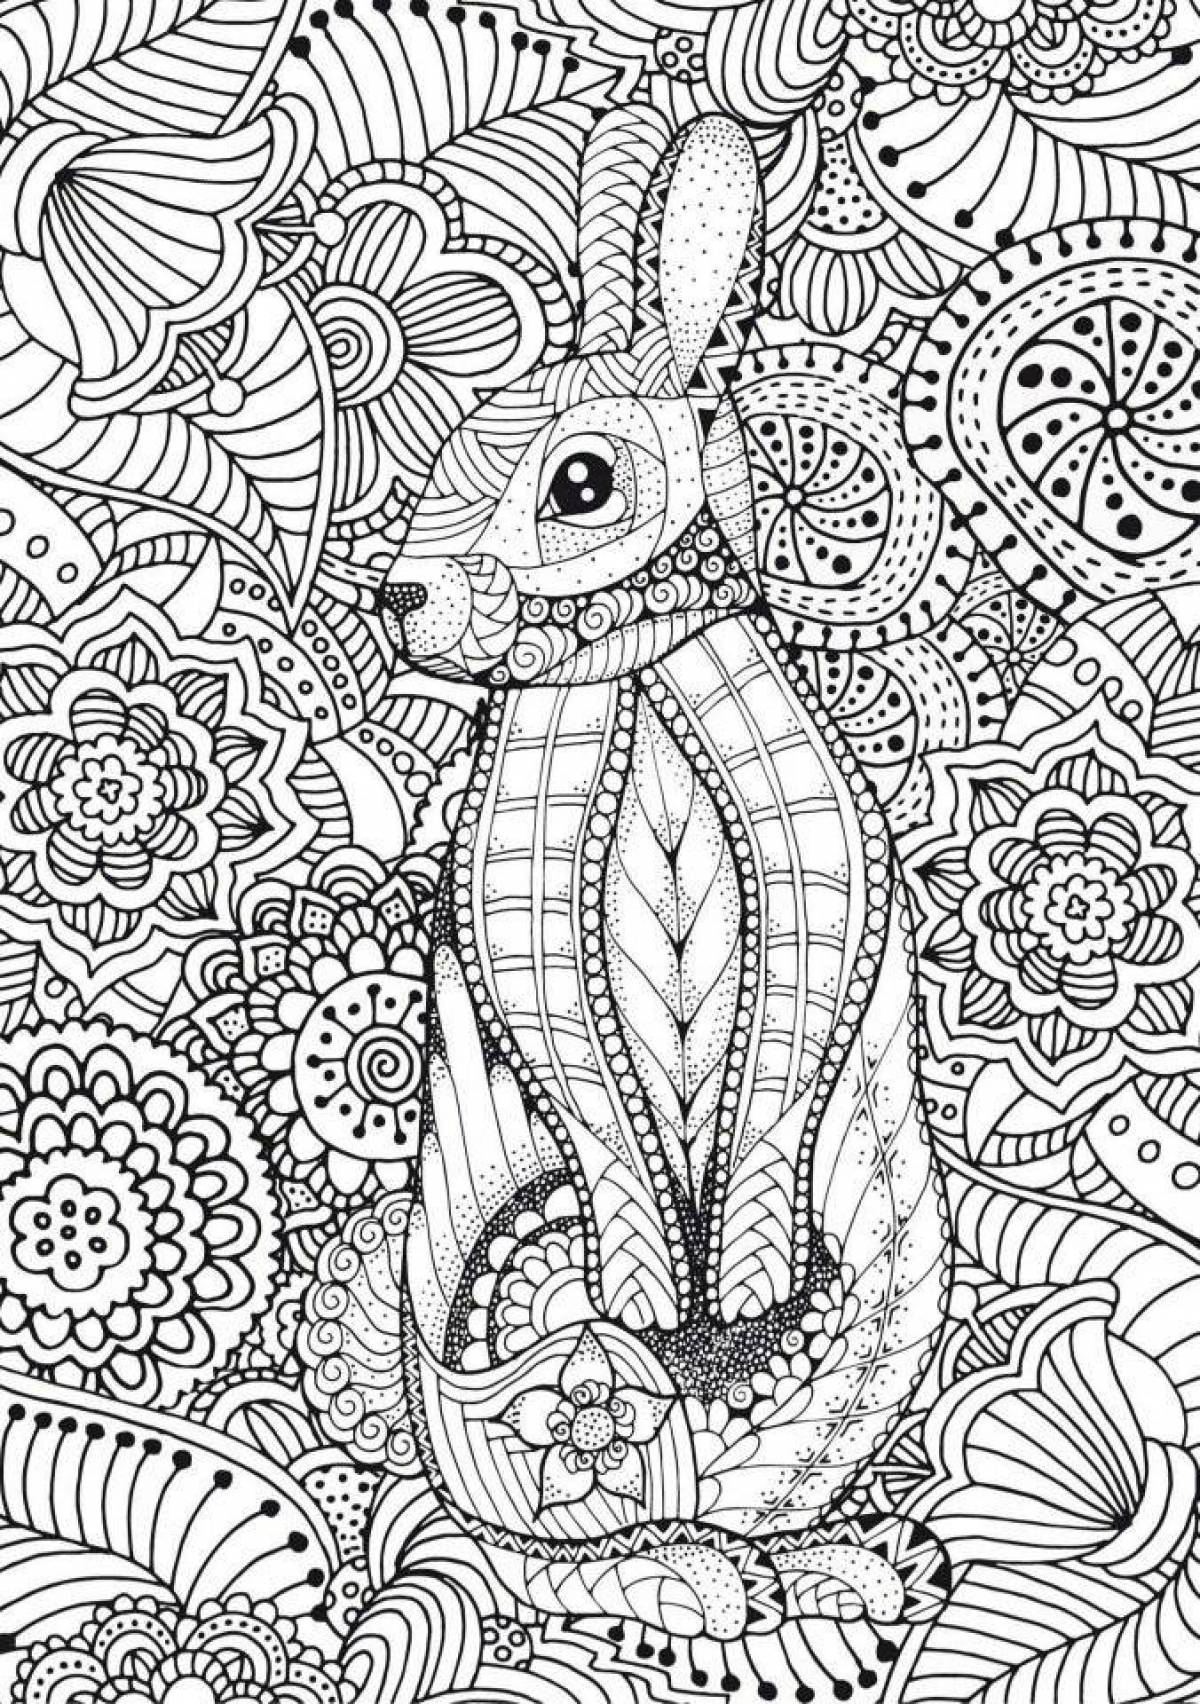 Soothing anti-stress coloring book